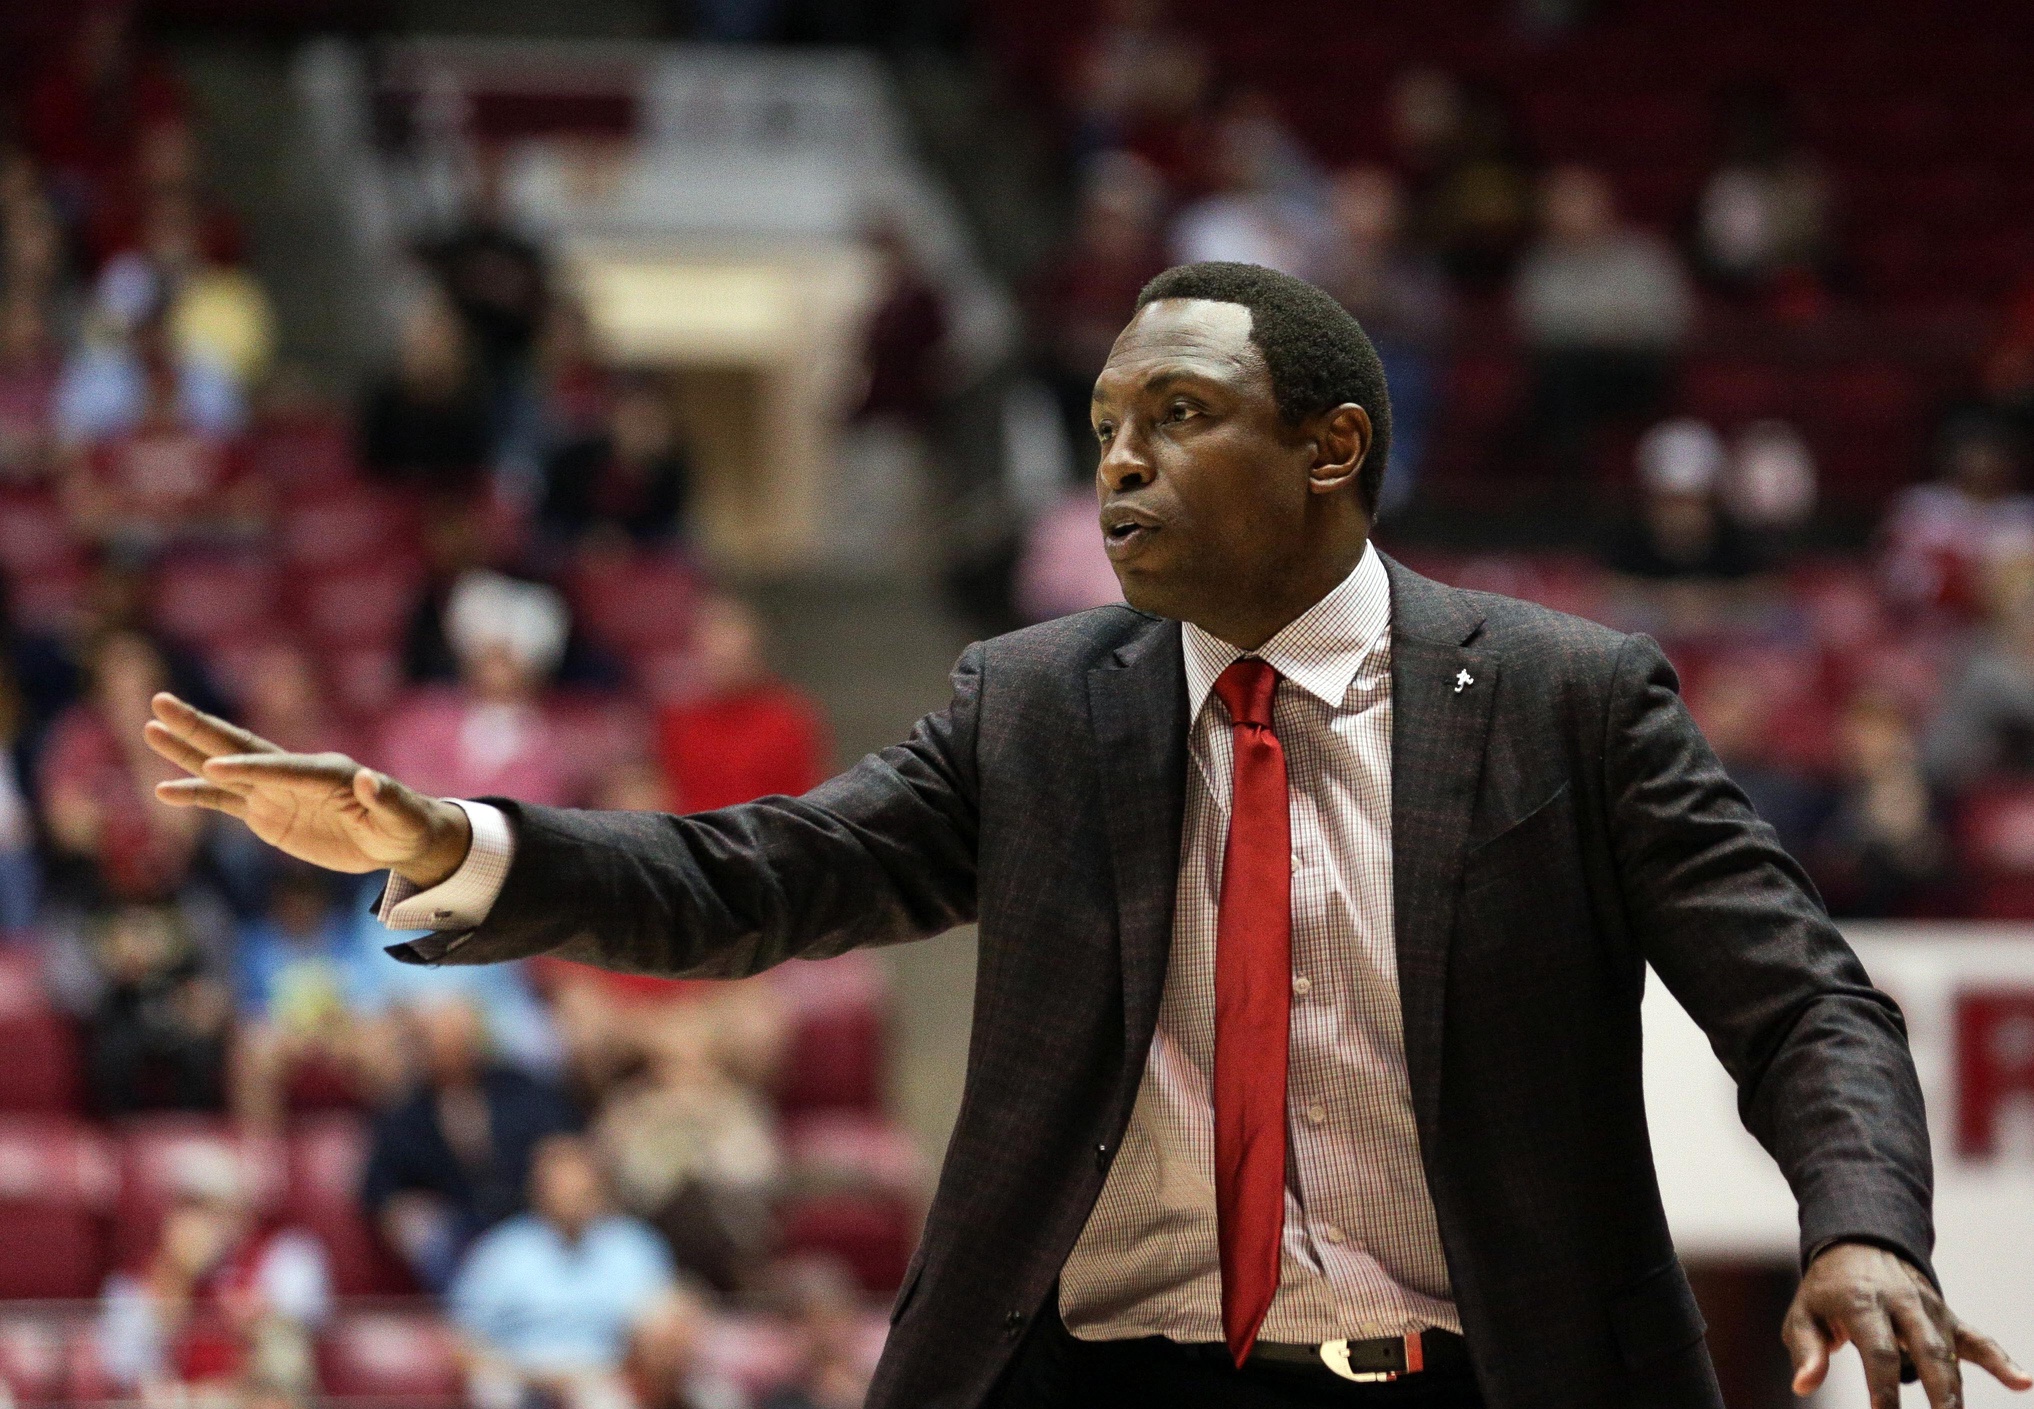 Mar 1, 2017; Tuscaloosa, AL, USA; Alabama Crimson Tide head coach Avery Johnson during the game against Mississippi Rebels at Coleman Coliseum. The Tide defeated the Rebels 70-55. Mandatory Credit: Marvin Gentry-USA TODAY Sports